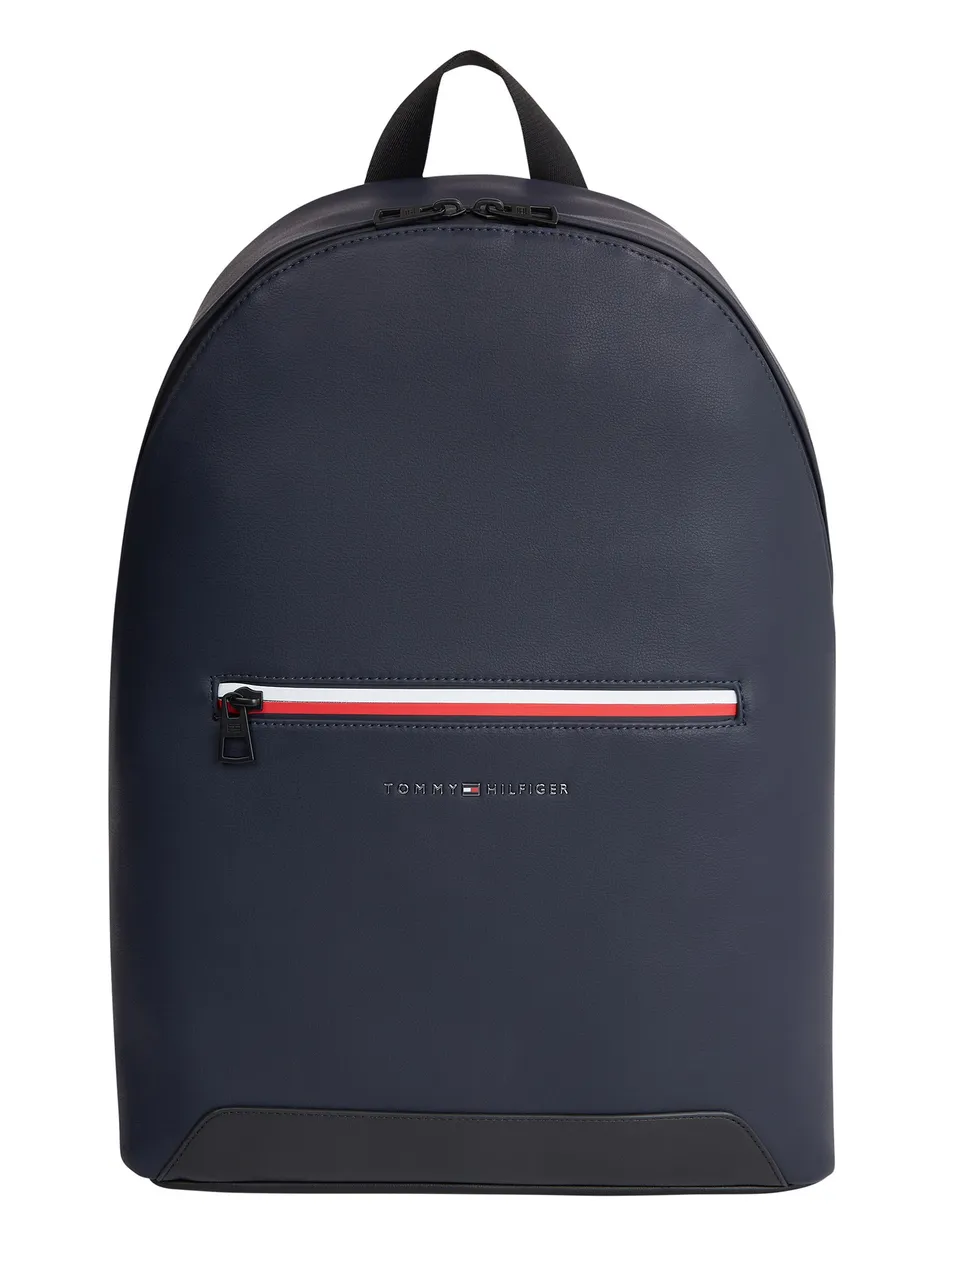 Essential Corp Dome Backpack